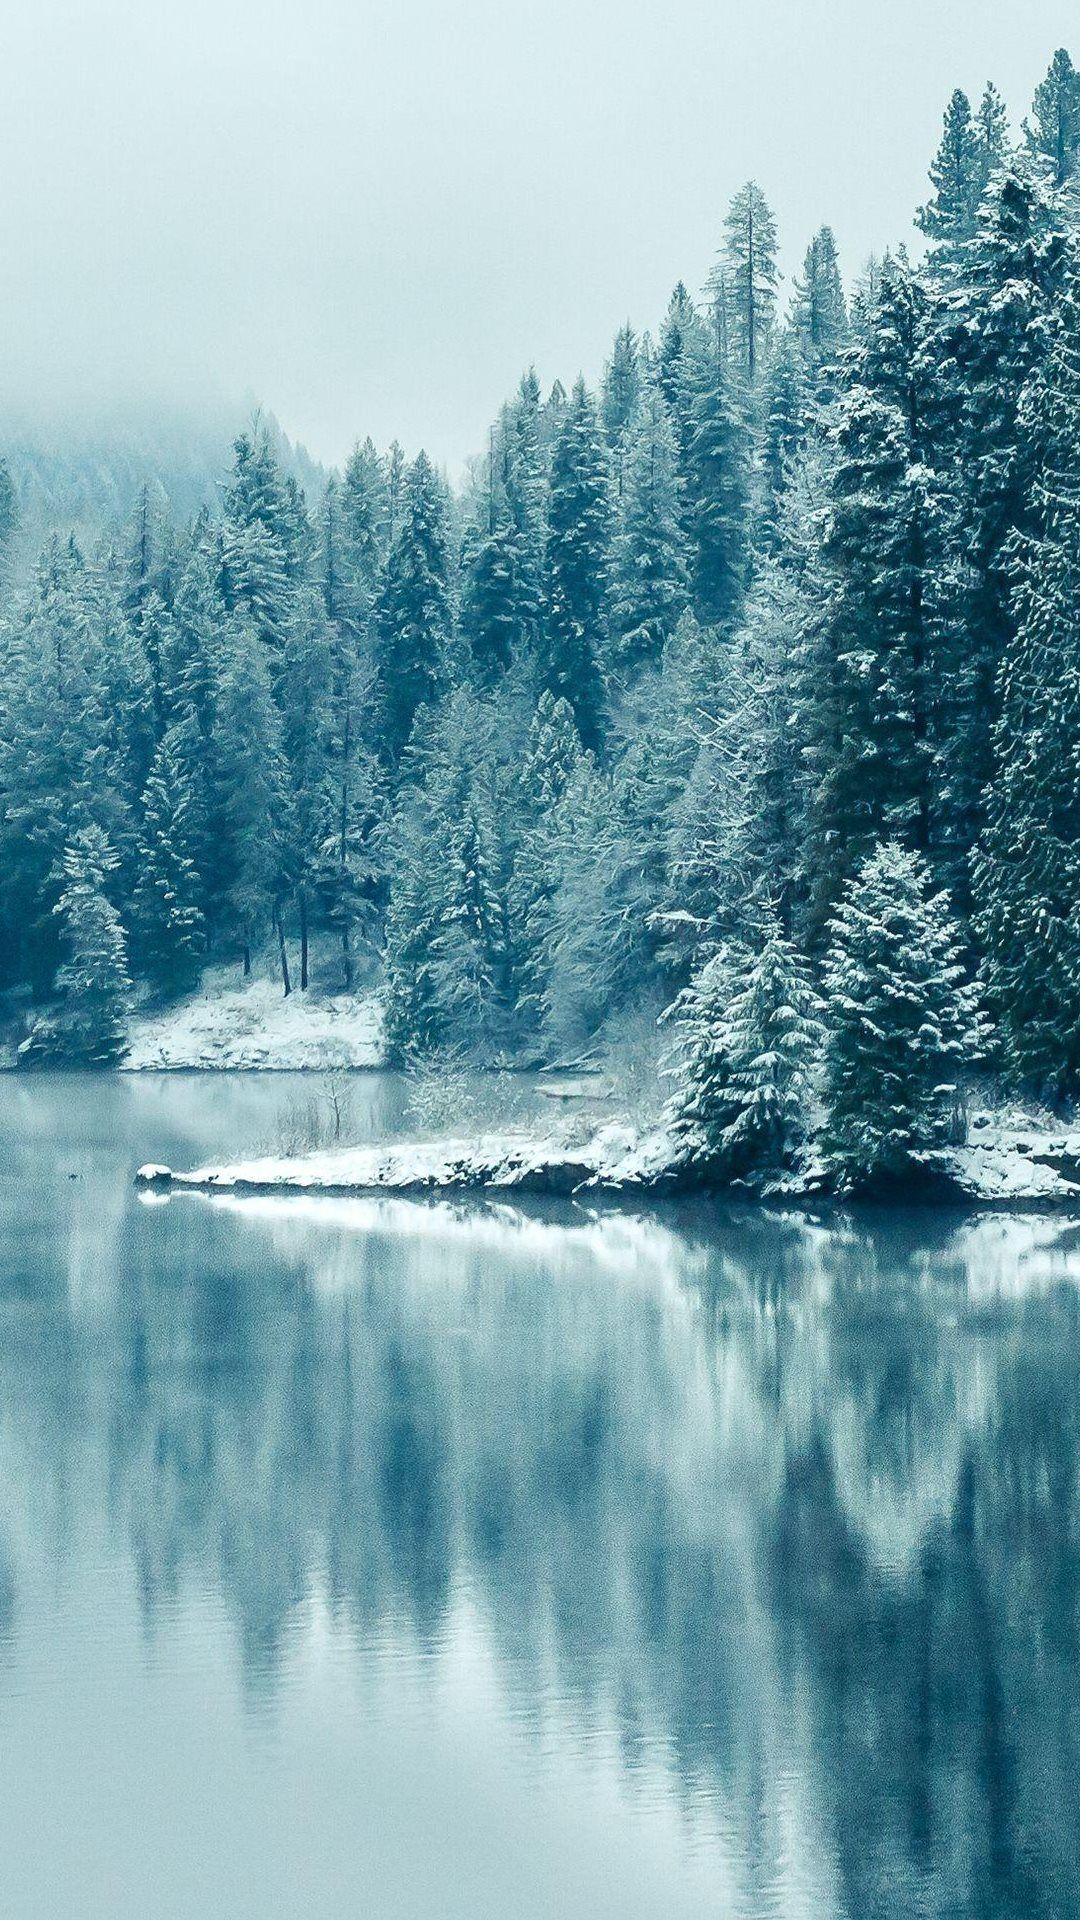 Turquoise Pine Forest Lake Snow. iPhone wallpaper. Winter